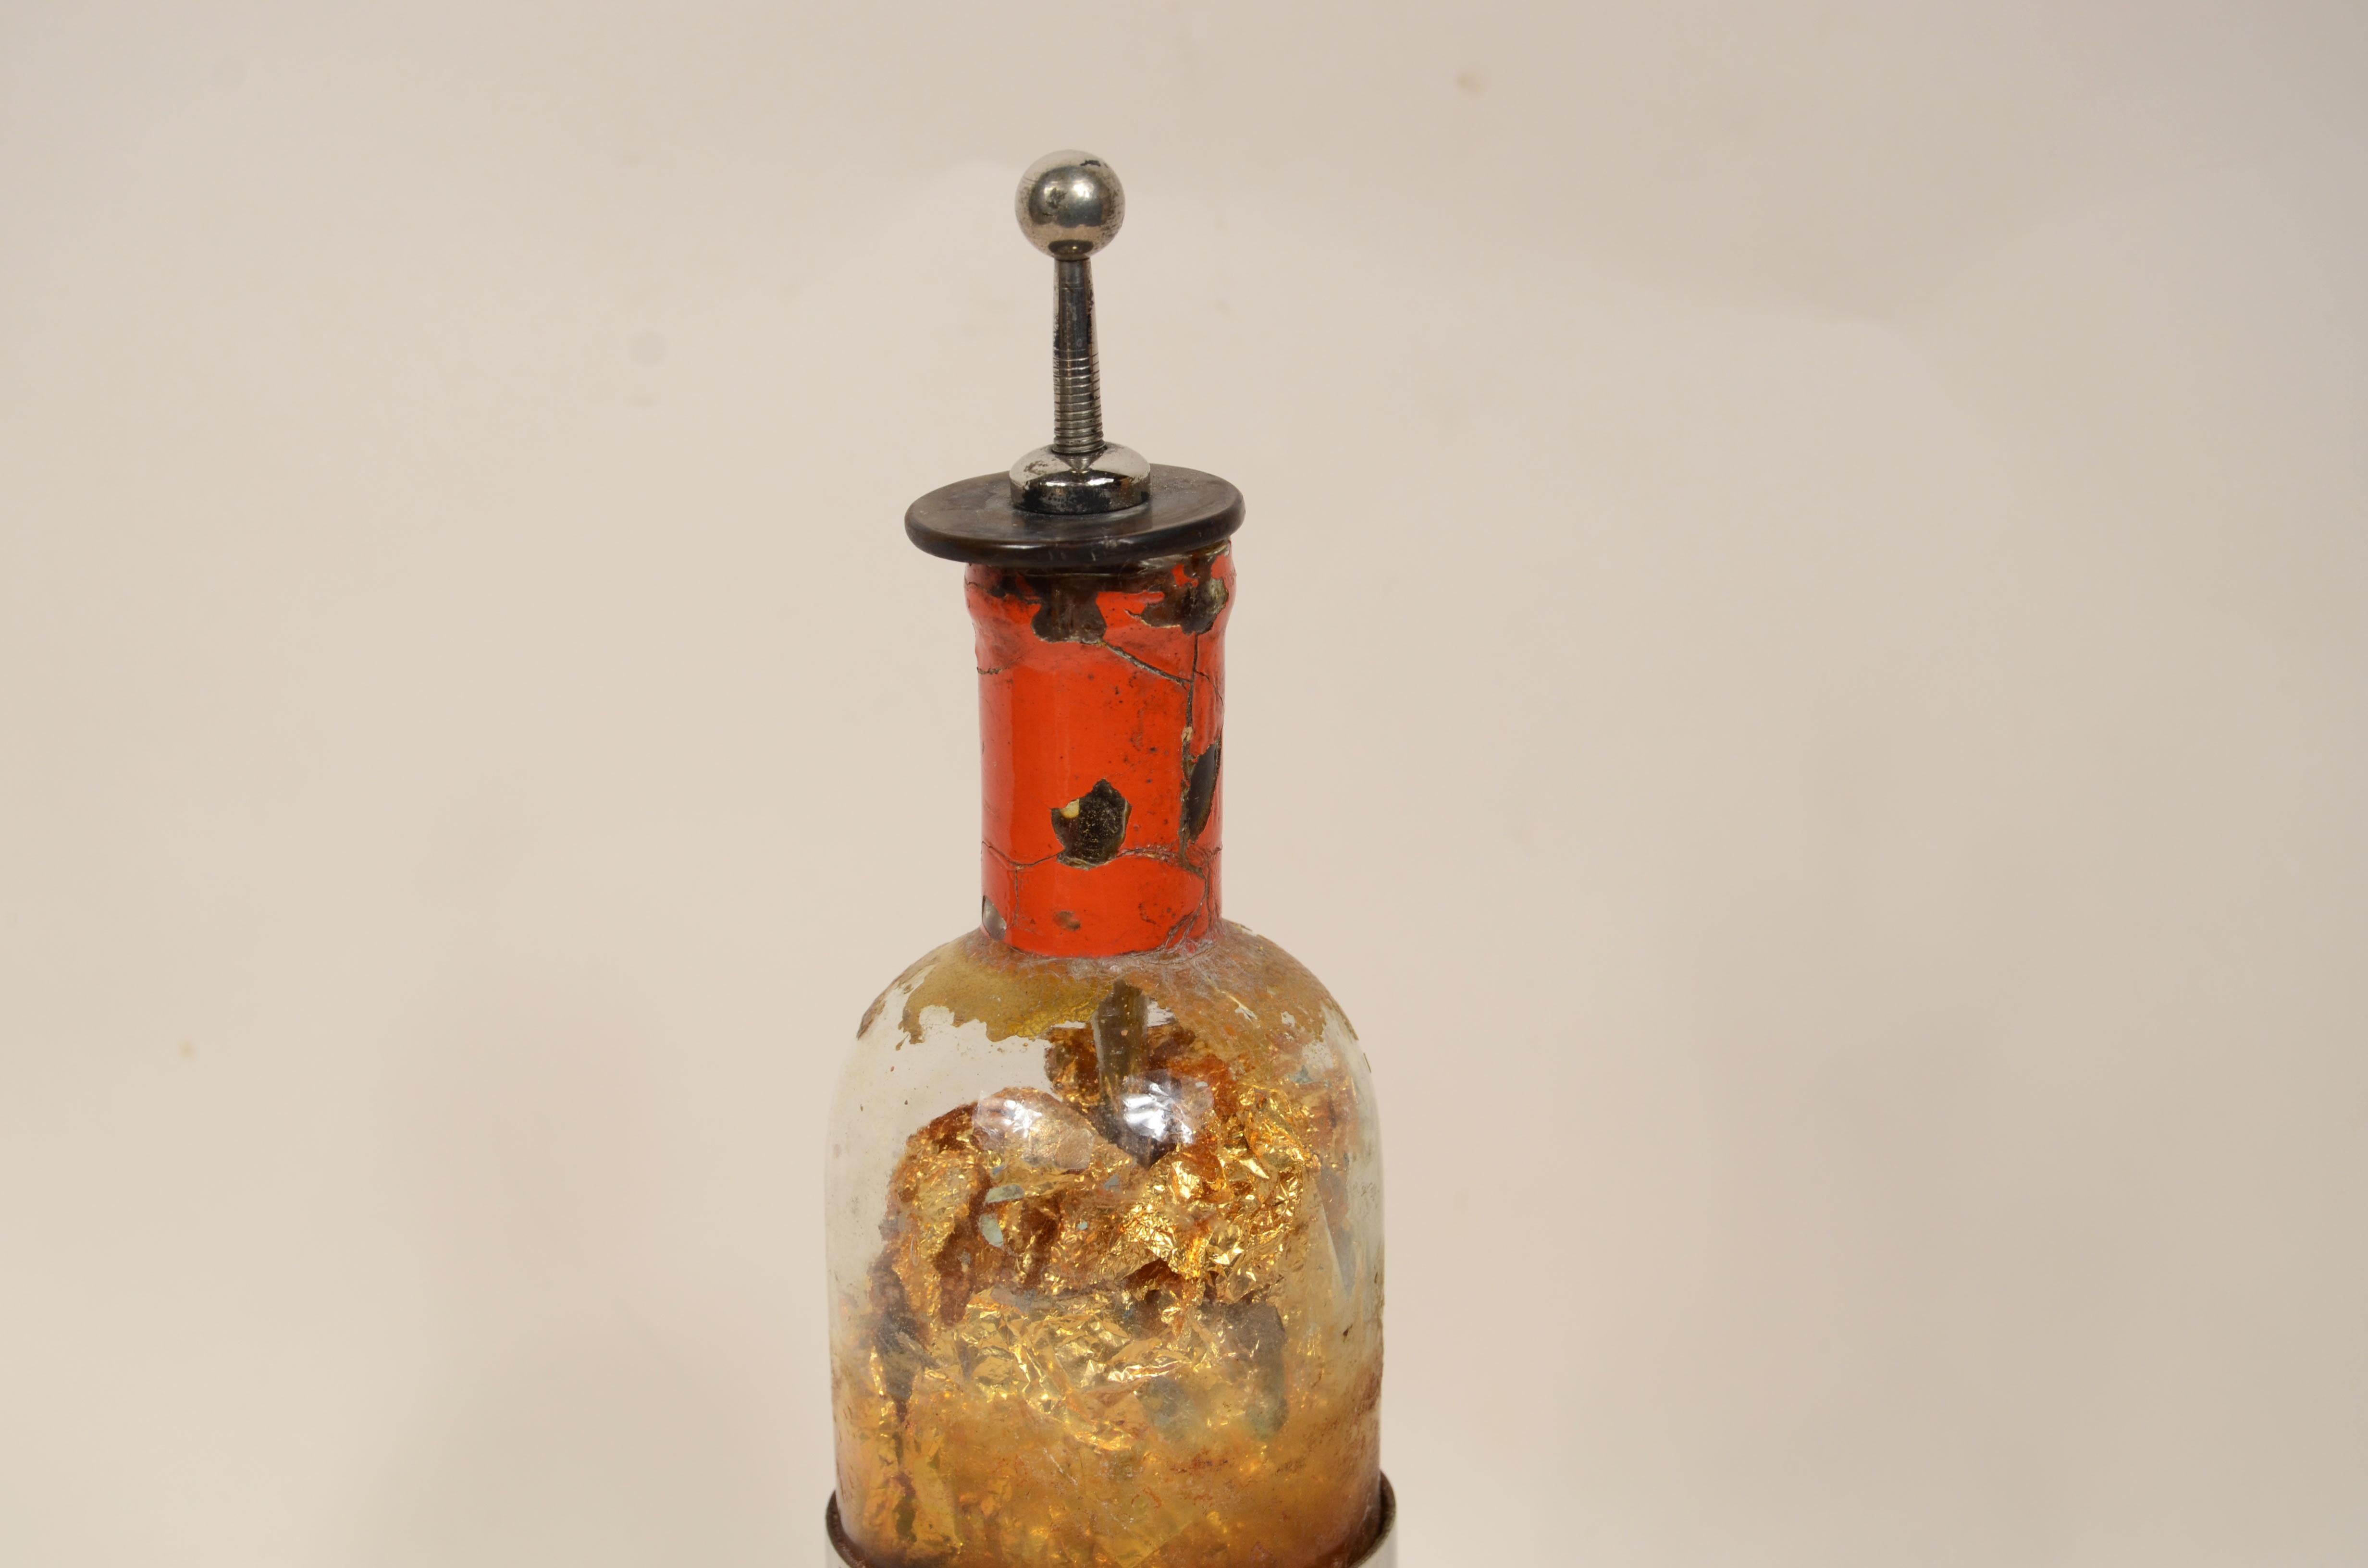 Leiden bottle from the second half of the 19th century  is about  an electrical component that accumulates and stores a high-voltage electrical charge by means of an external source  for example, an electrostatic generator. Generally made from a